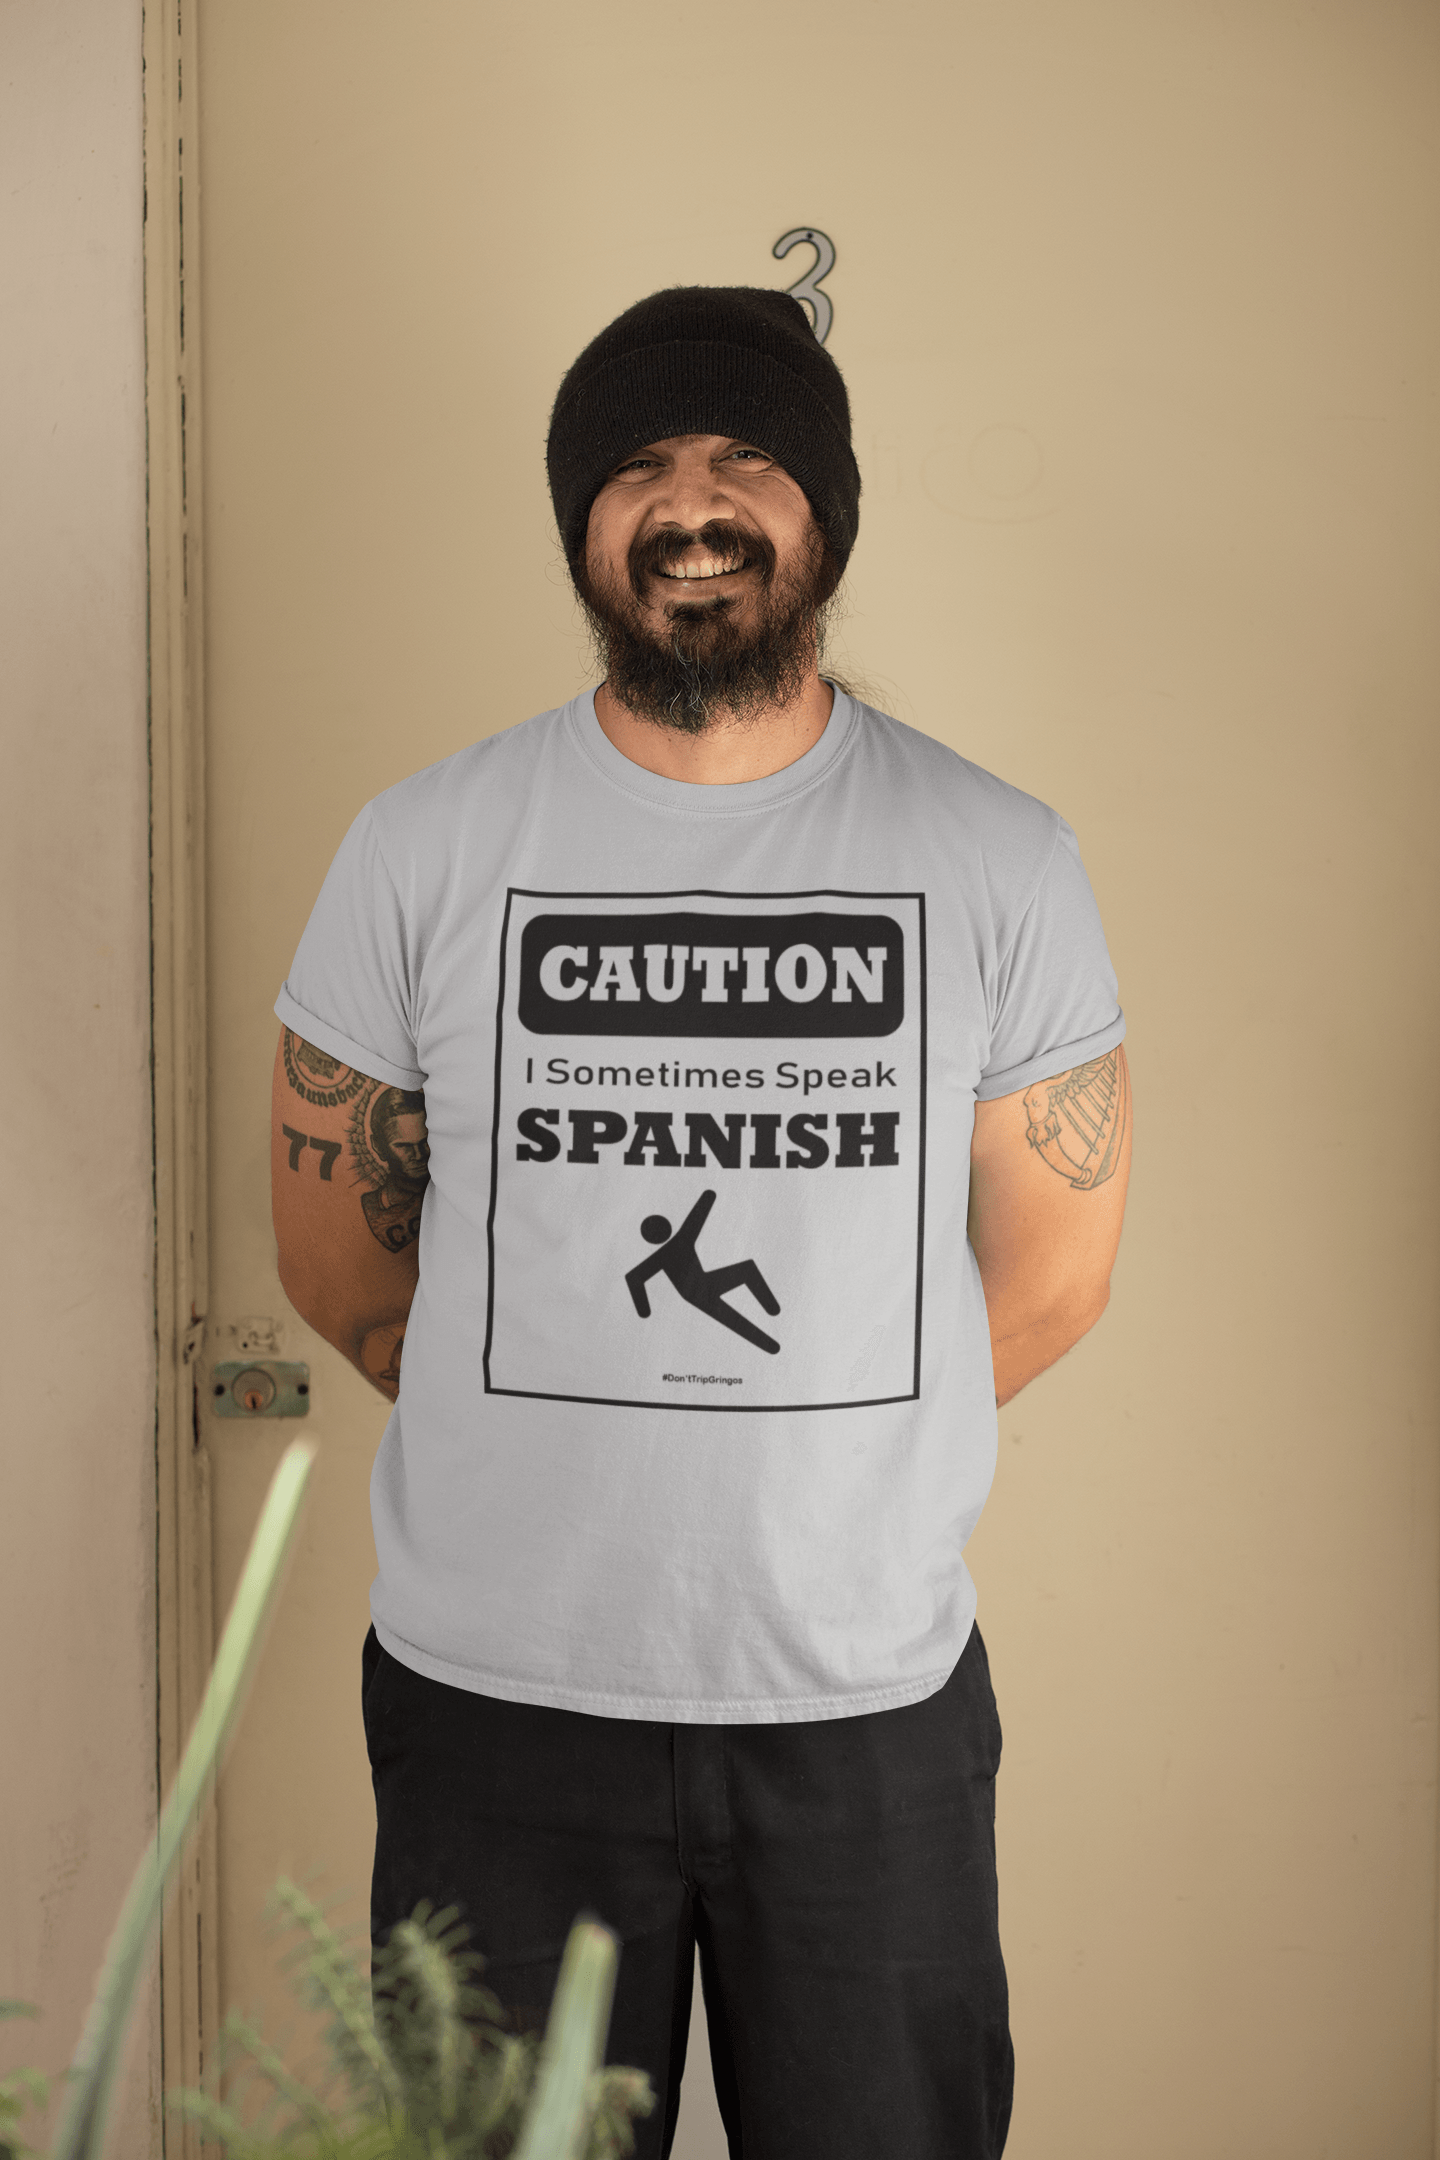 Gray t-shirt with black text and design that reads, "Caution I sometimes speak Spanish #Don'tTripGringos " in a caution sign layout. It is available in sizes SM-4XL at www.sanchezhere.com